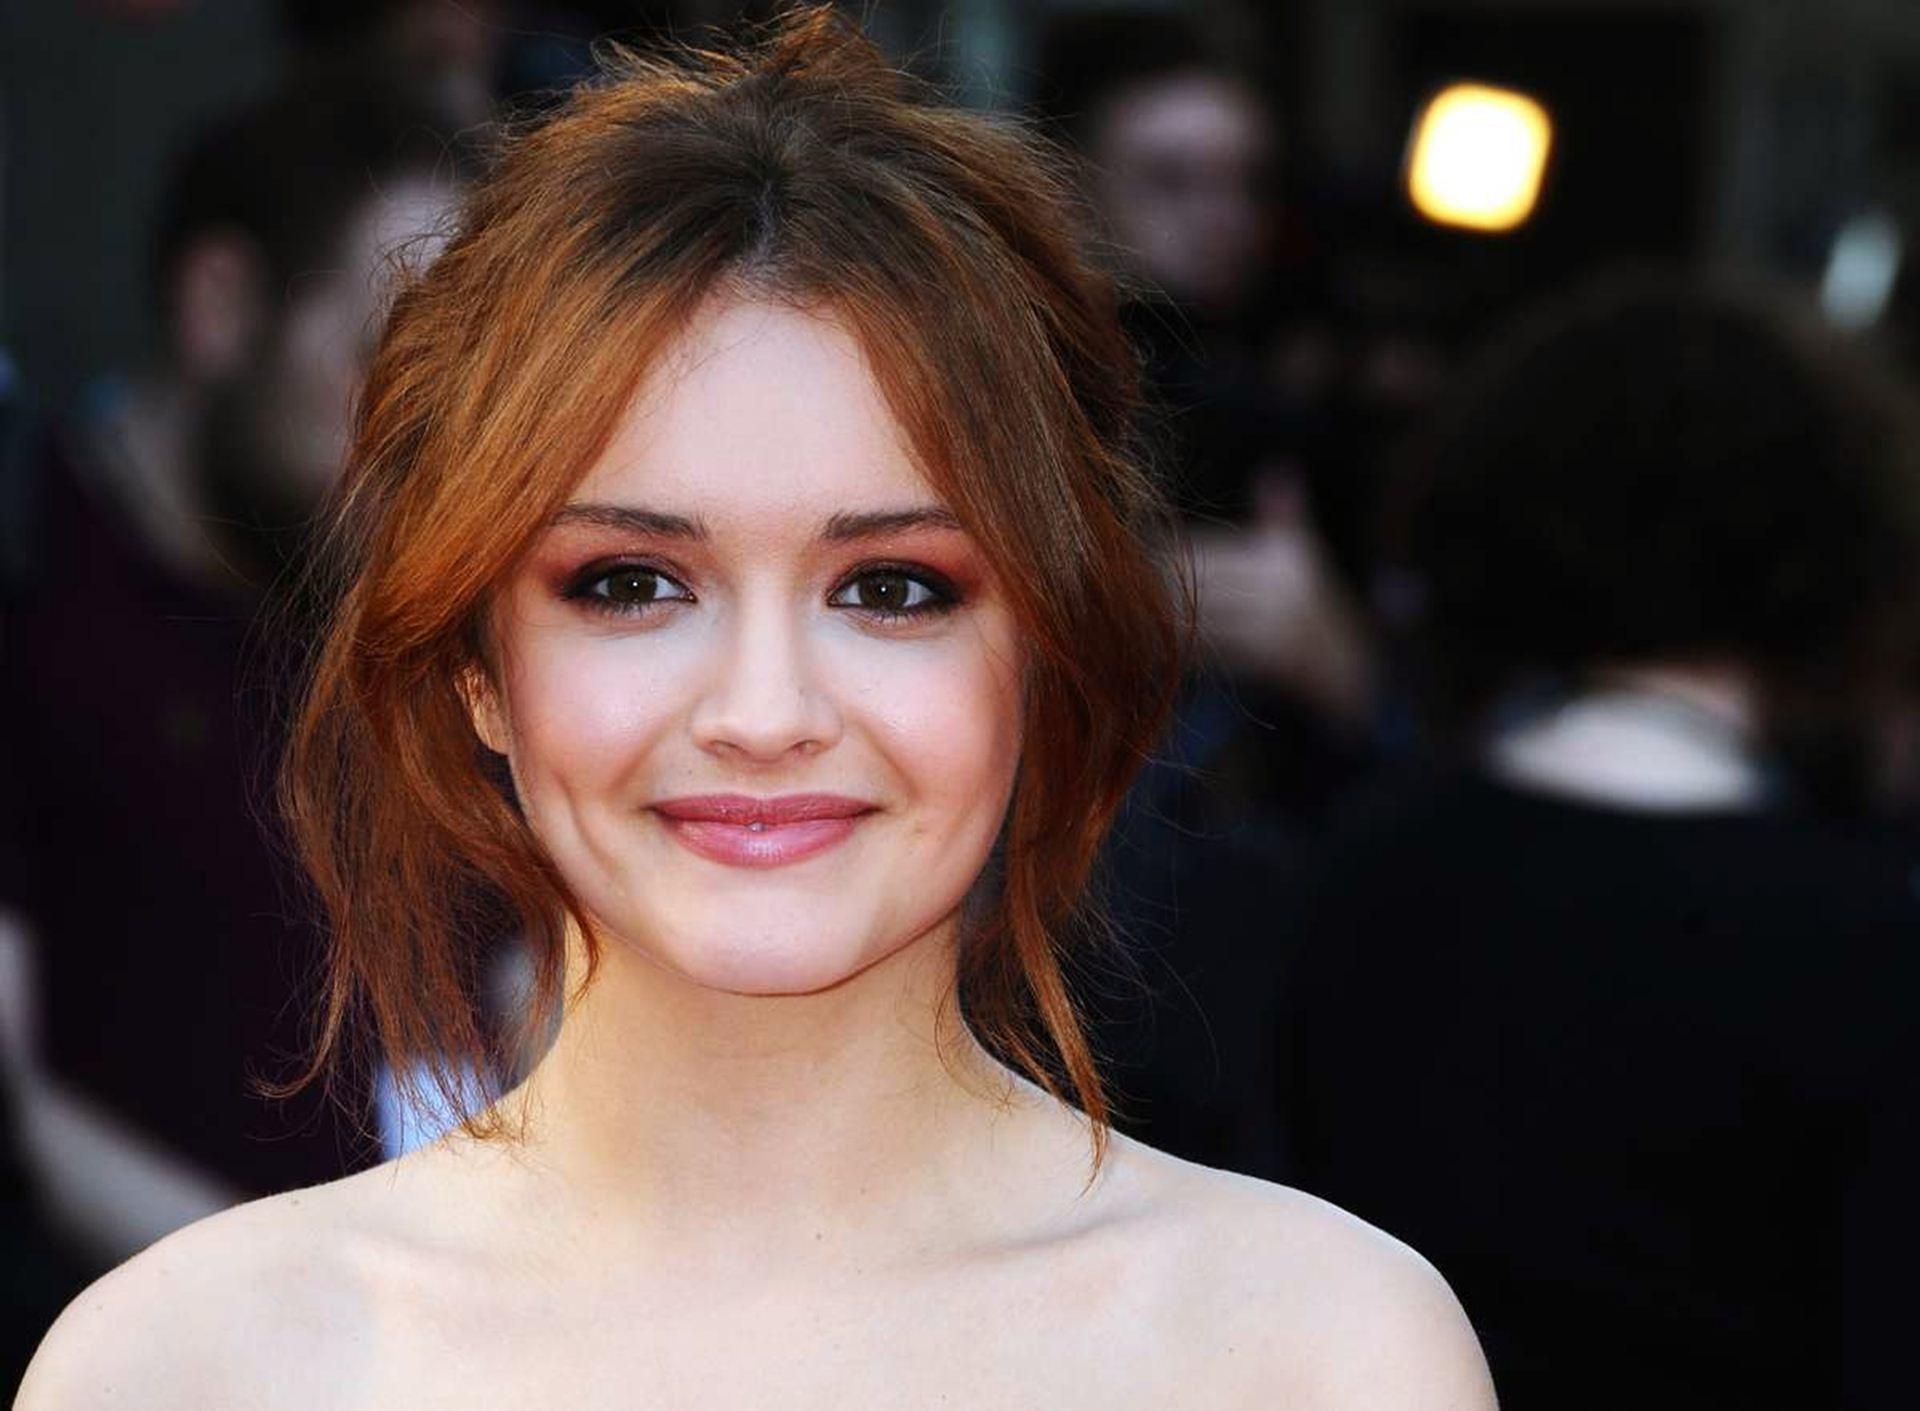 Olivia Cooke Wallpaper High Resolution and Quality Download